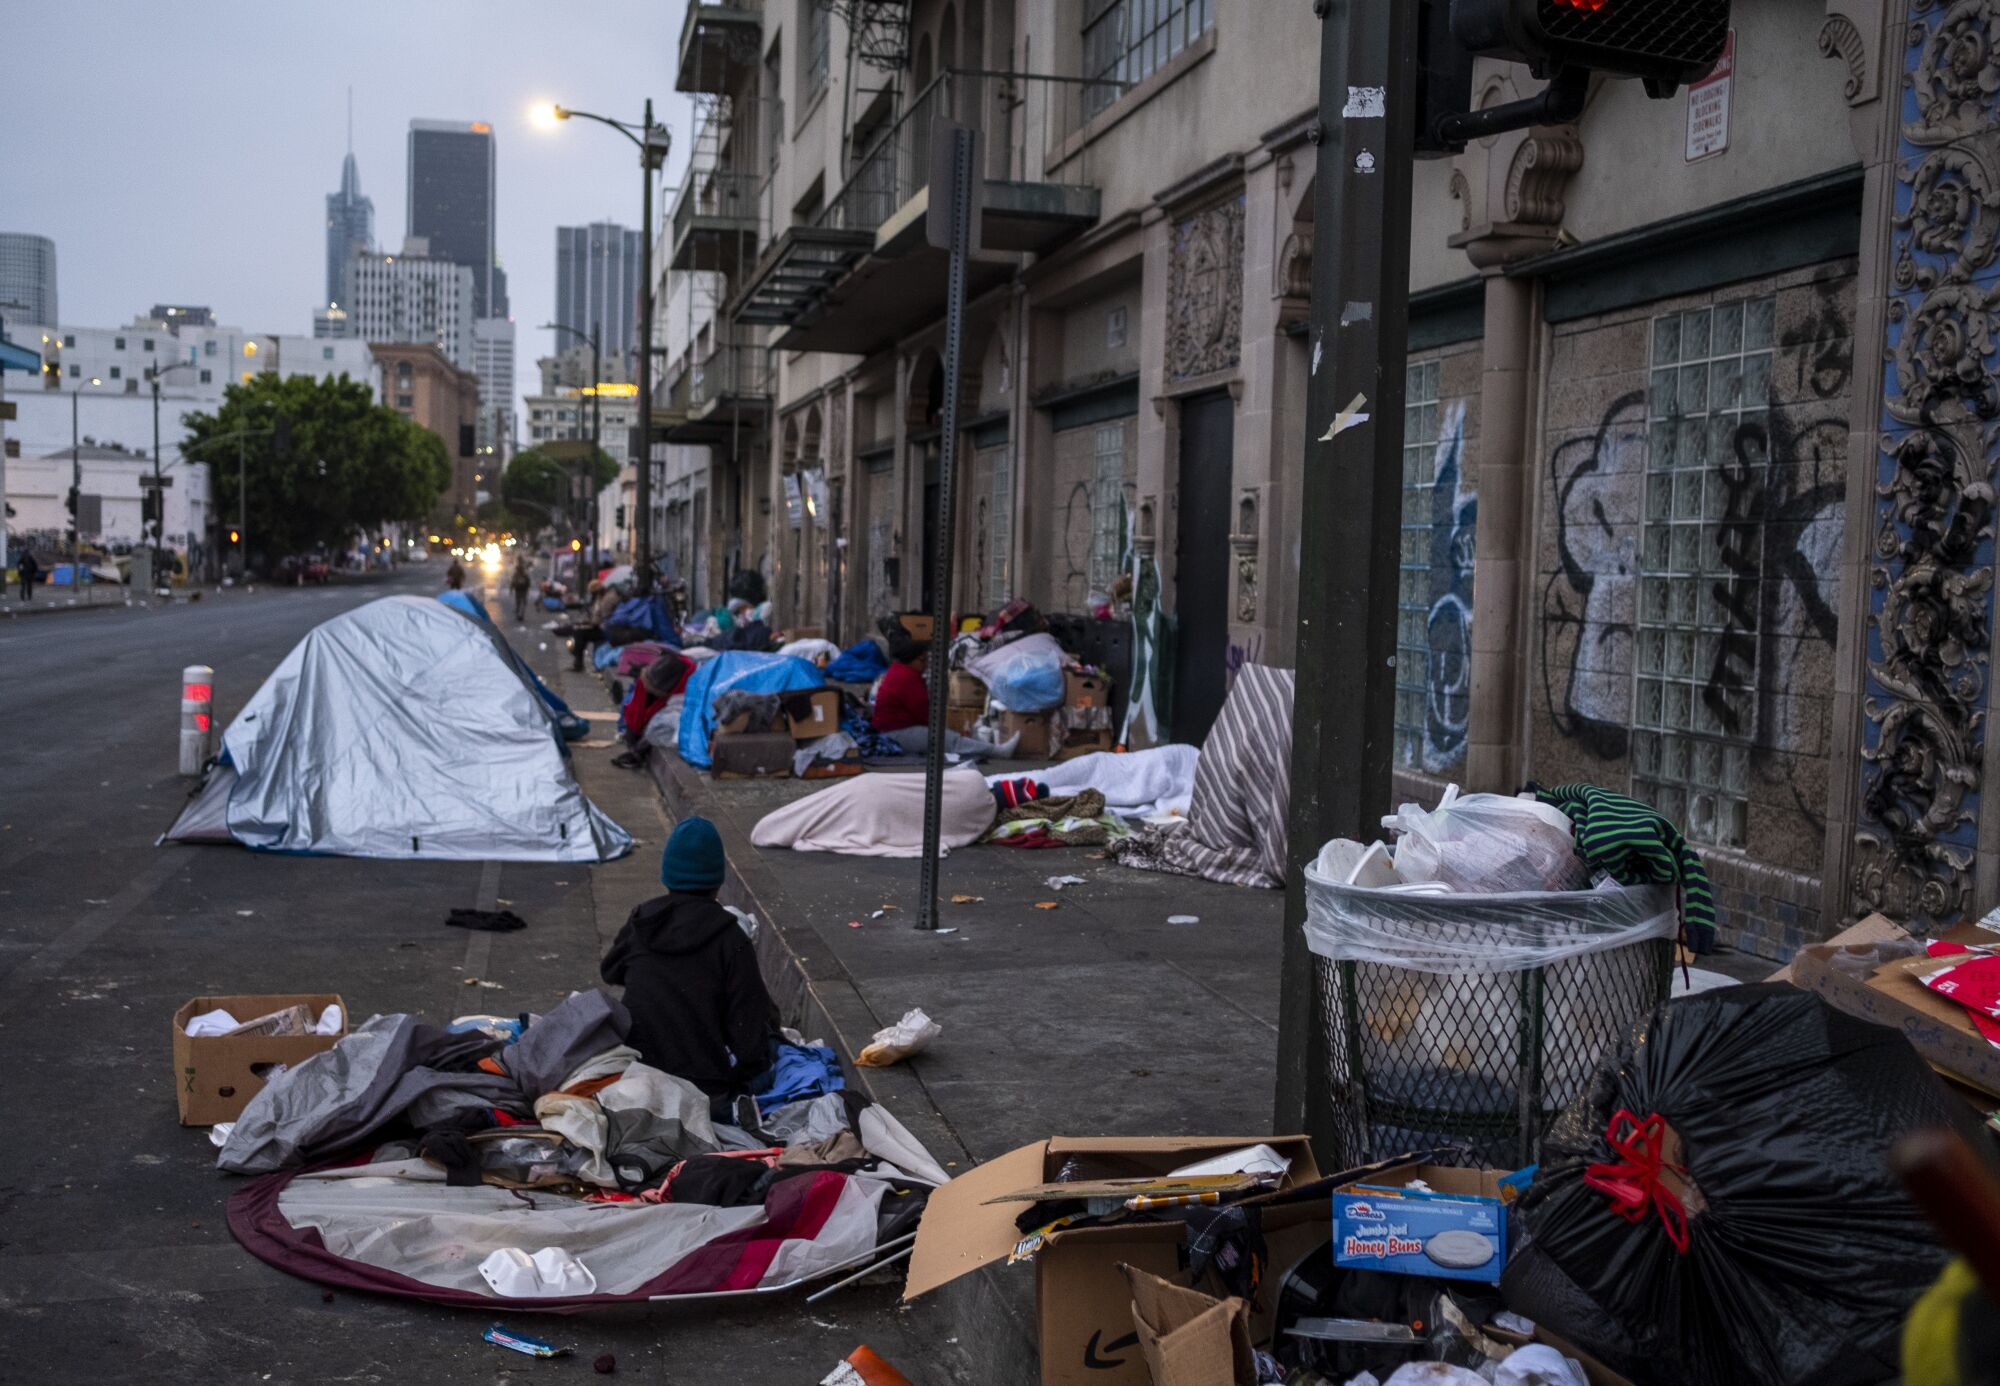 L.A. skid row cleaning benefits homeless and provides jobs - Los ...